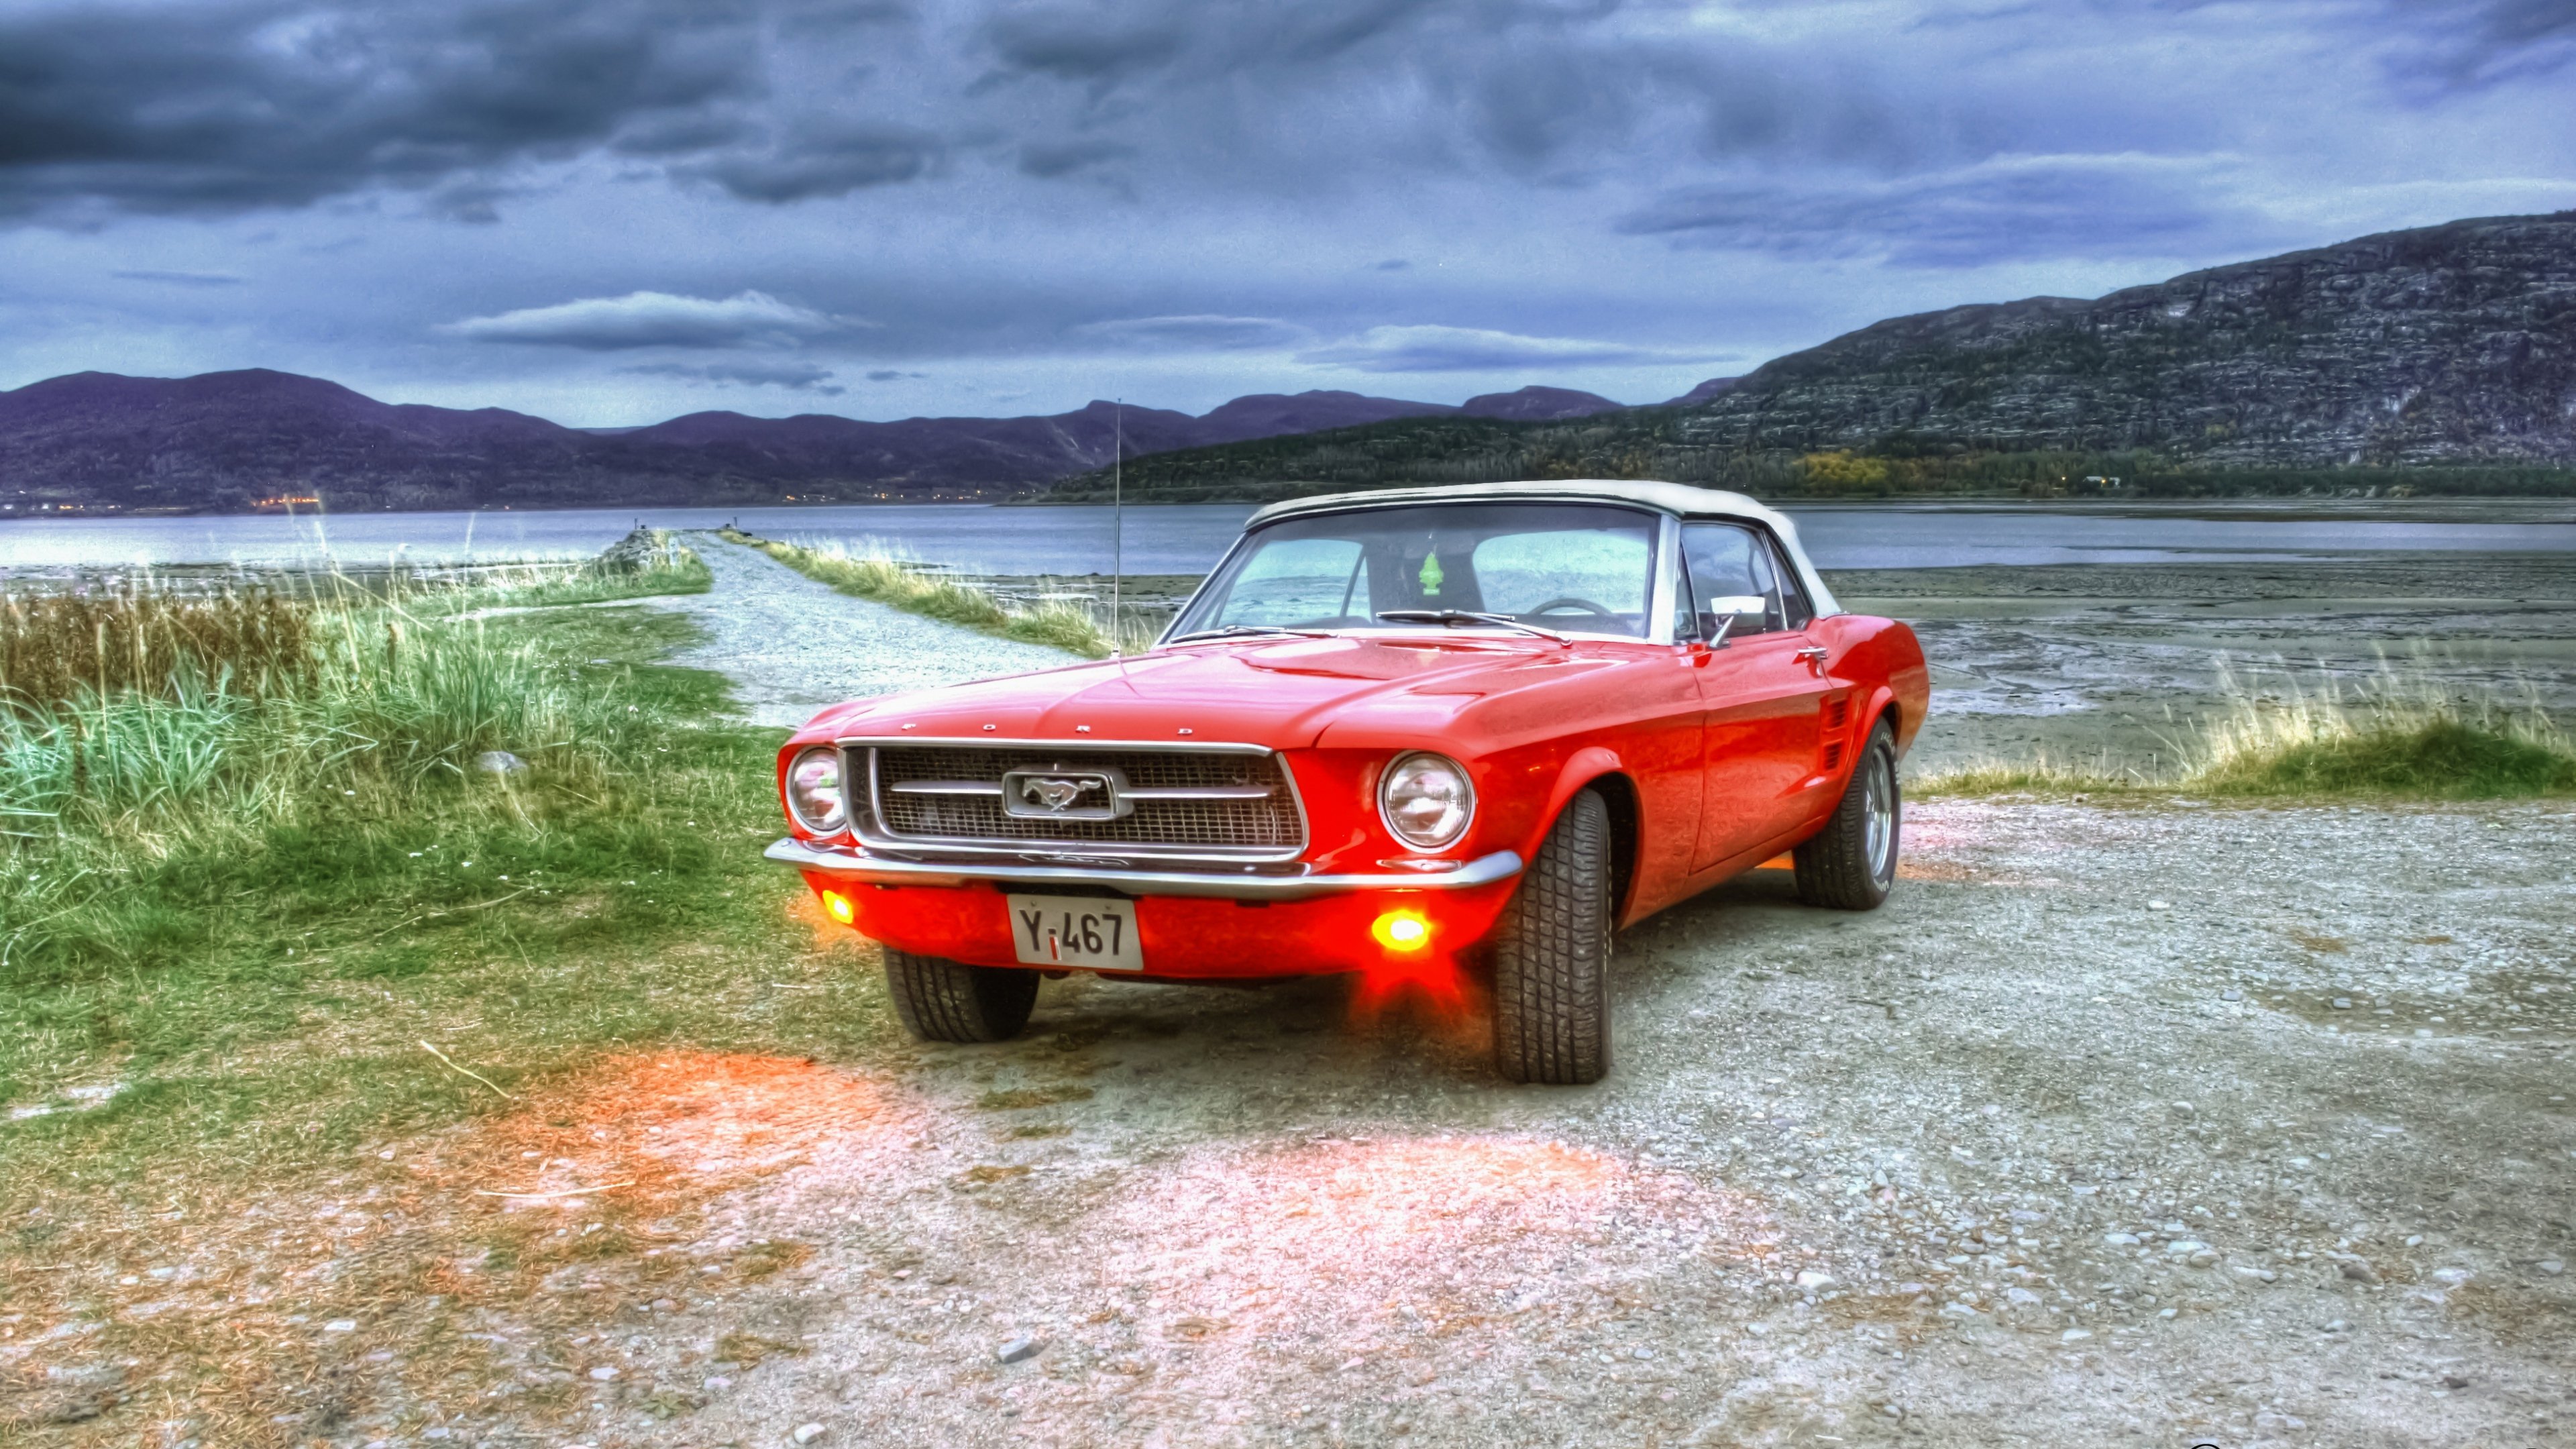  3840x2160 Ford Mustang Hdr Wallpaper Background 4K Ultra HD 3840x2160